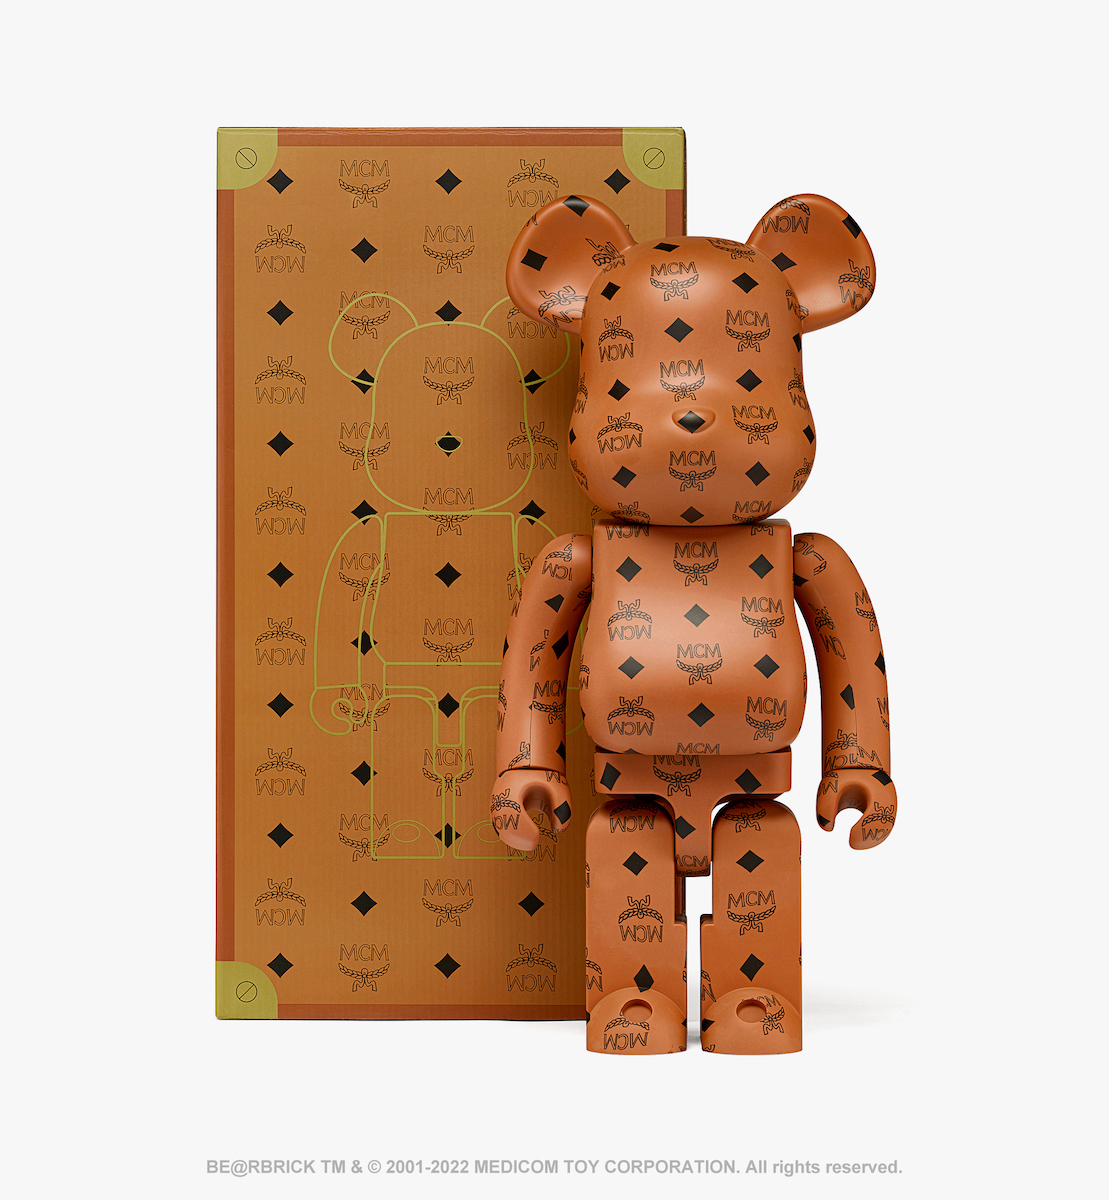 The Luxury 400% Bearbricks Every Serious Collector Needs to Own